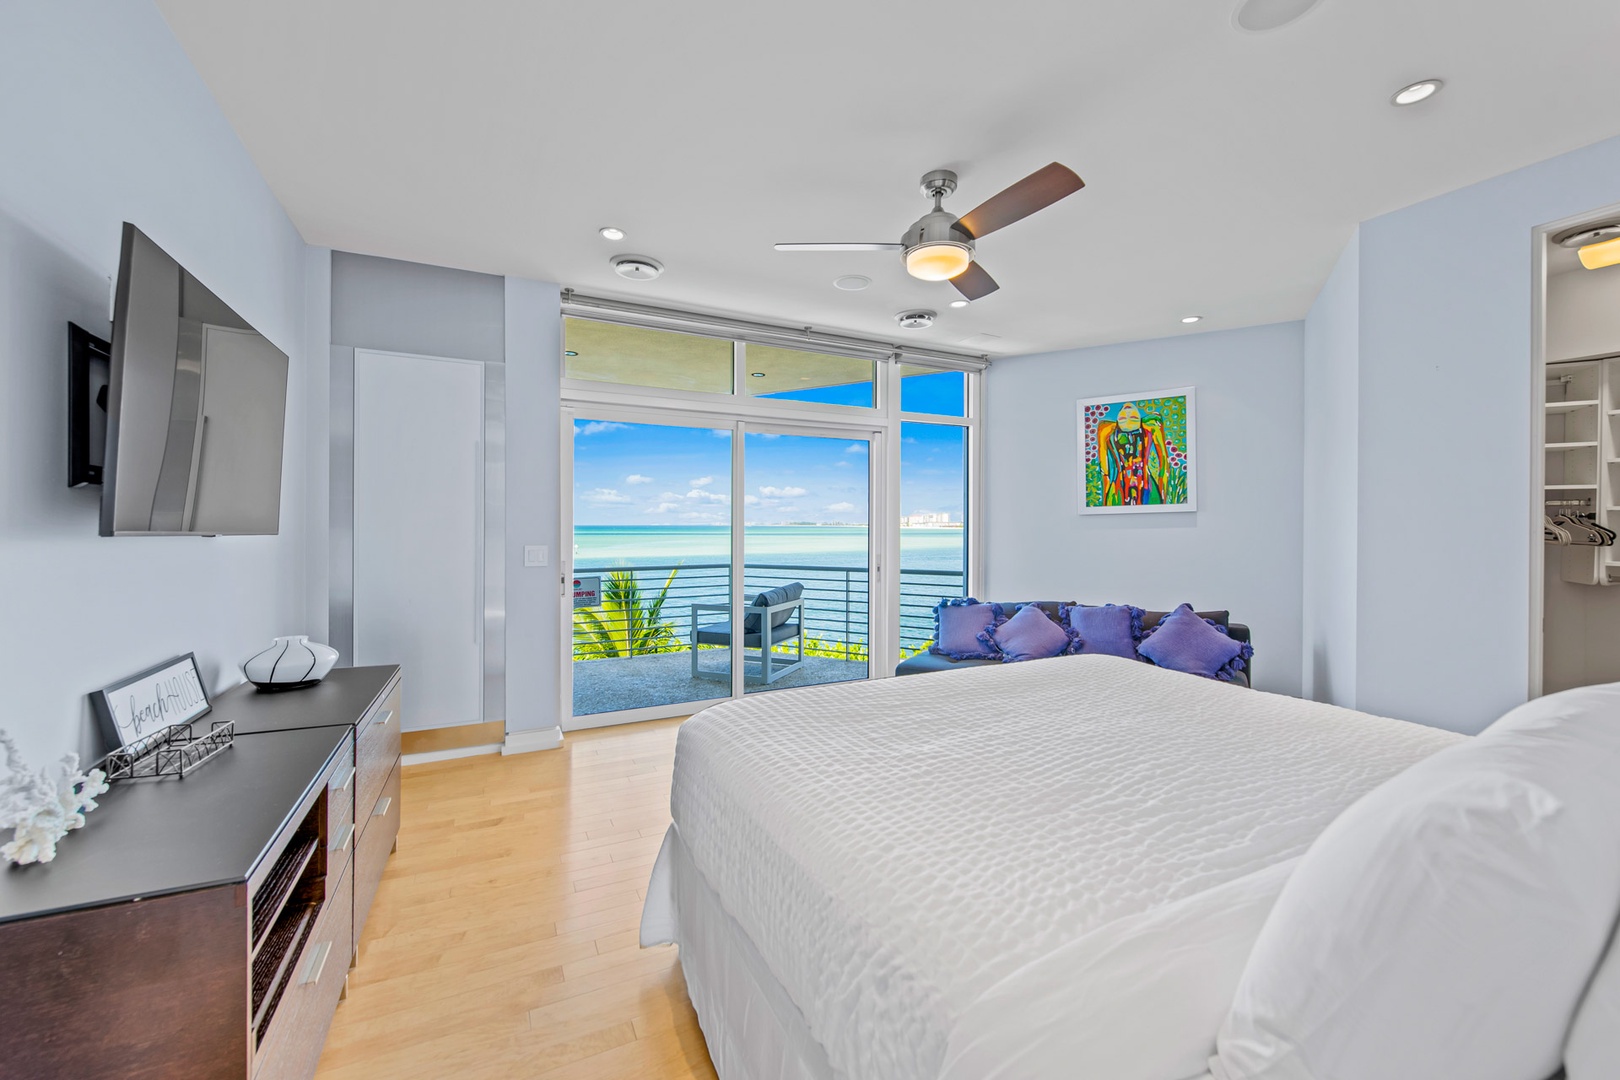 Bedroom 2 - King Bed with Private Balcony & Gulf Views